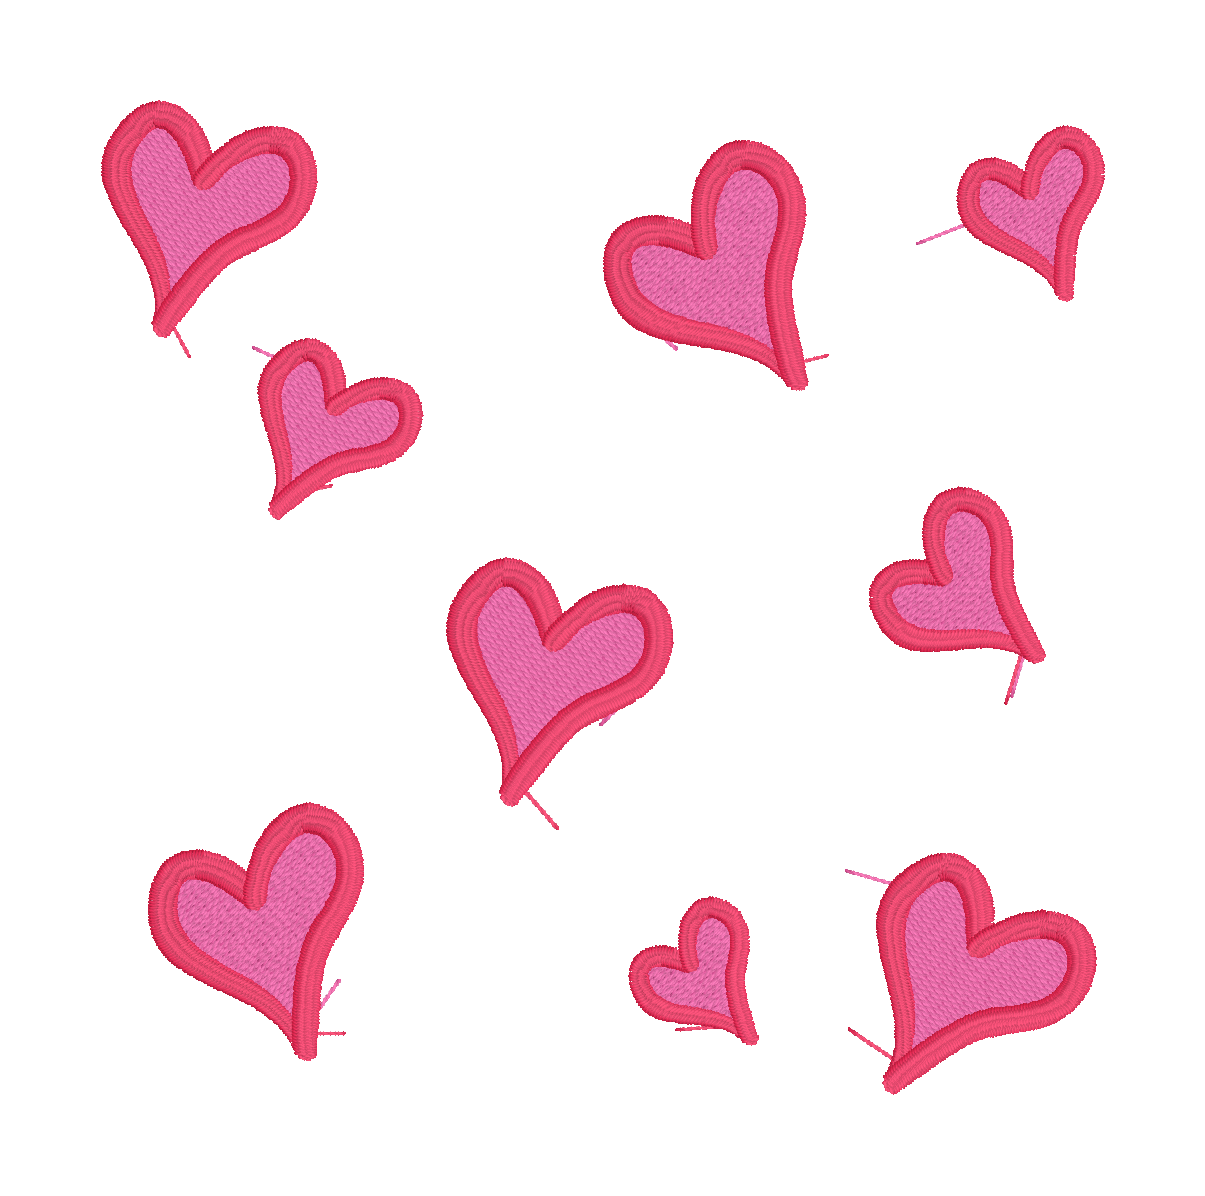 Scatter Hearts Embroidery Design